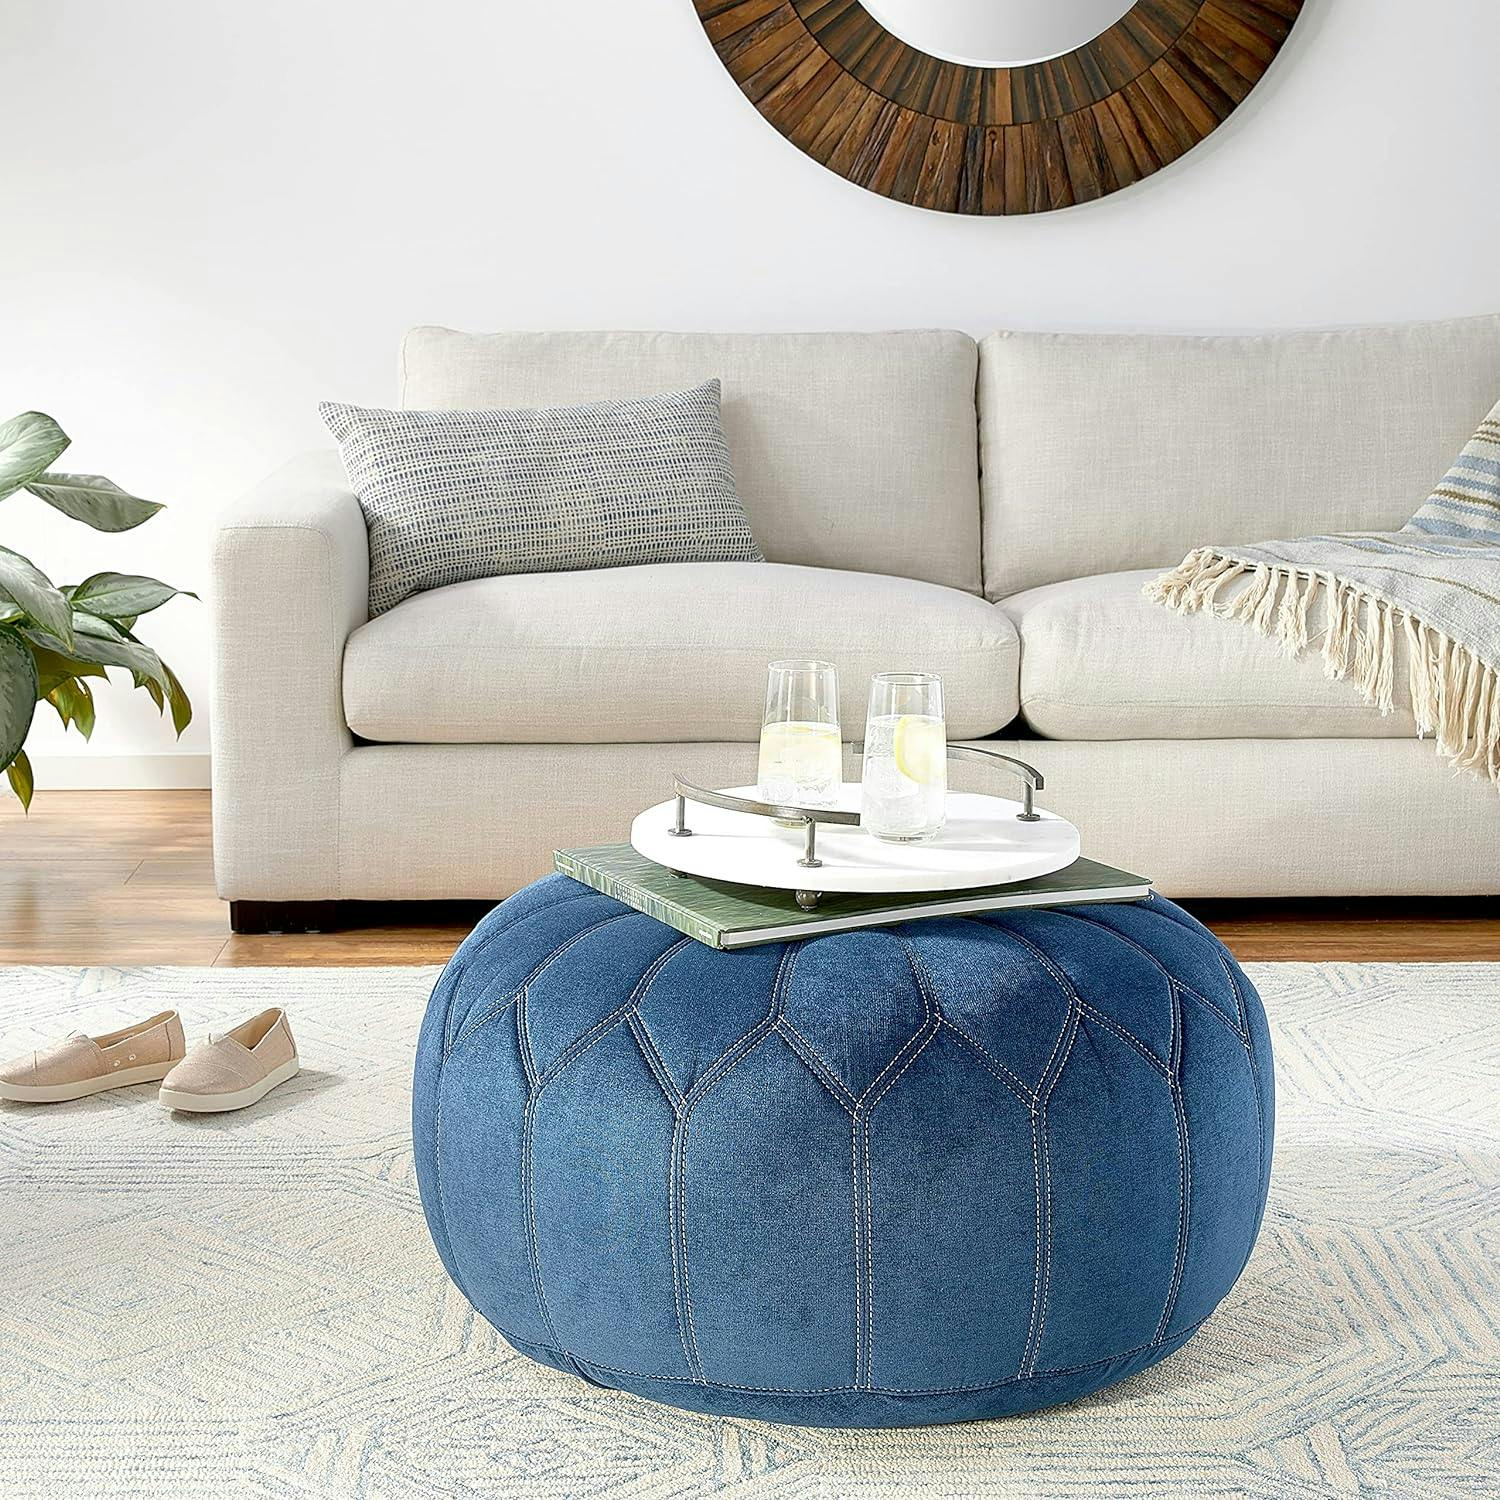 Blue Floral Oversized Round Pouf Ottoman with White Stitching